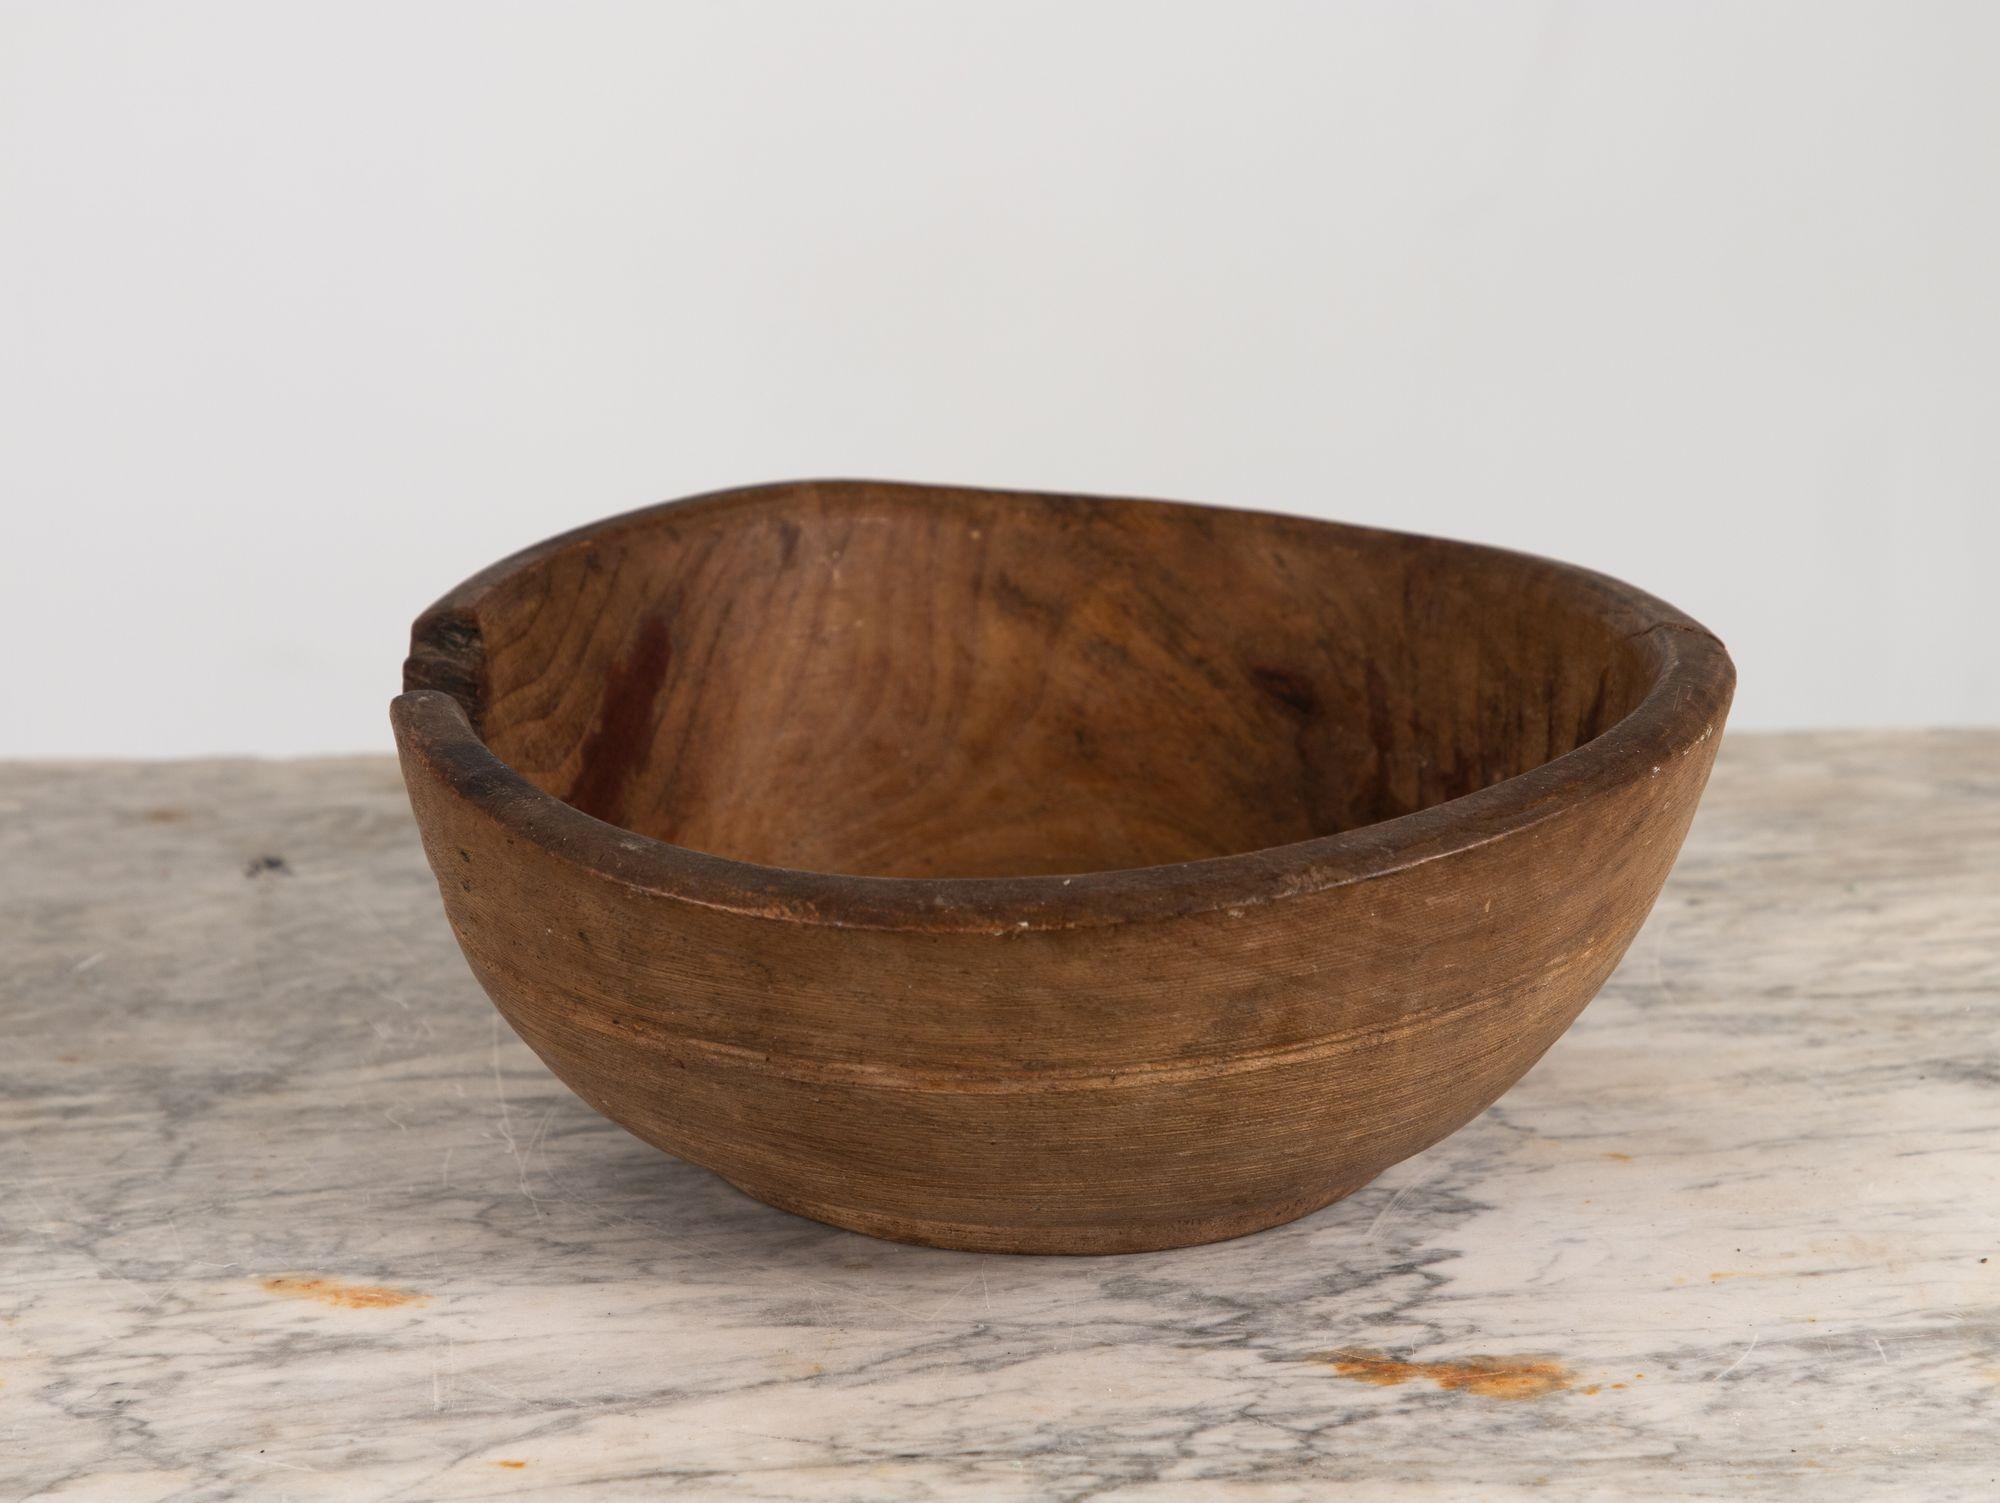 This vintage dugout wood bowl is a remarkable piece that embodies rustic charm and history. Crafted from a solid piece of wood, it showcases the natural beauty and unique grain patterns of the material. The bowl's dugout design suggests it was